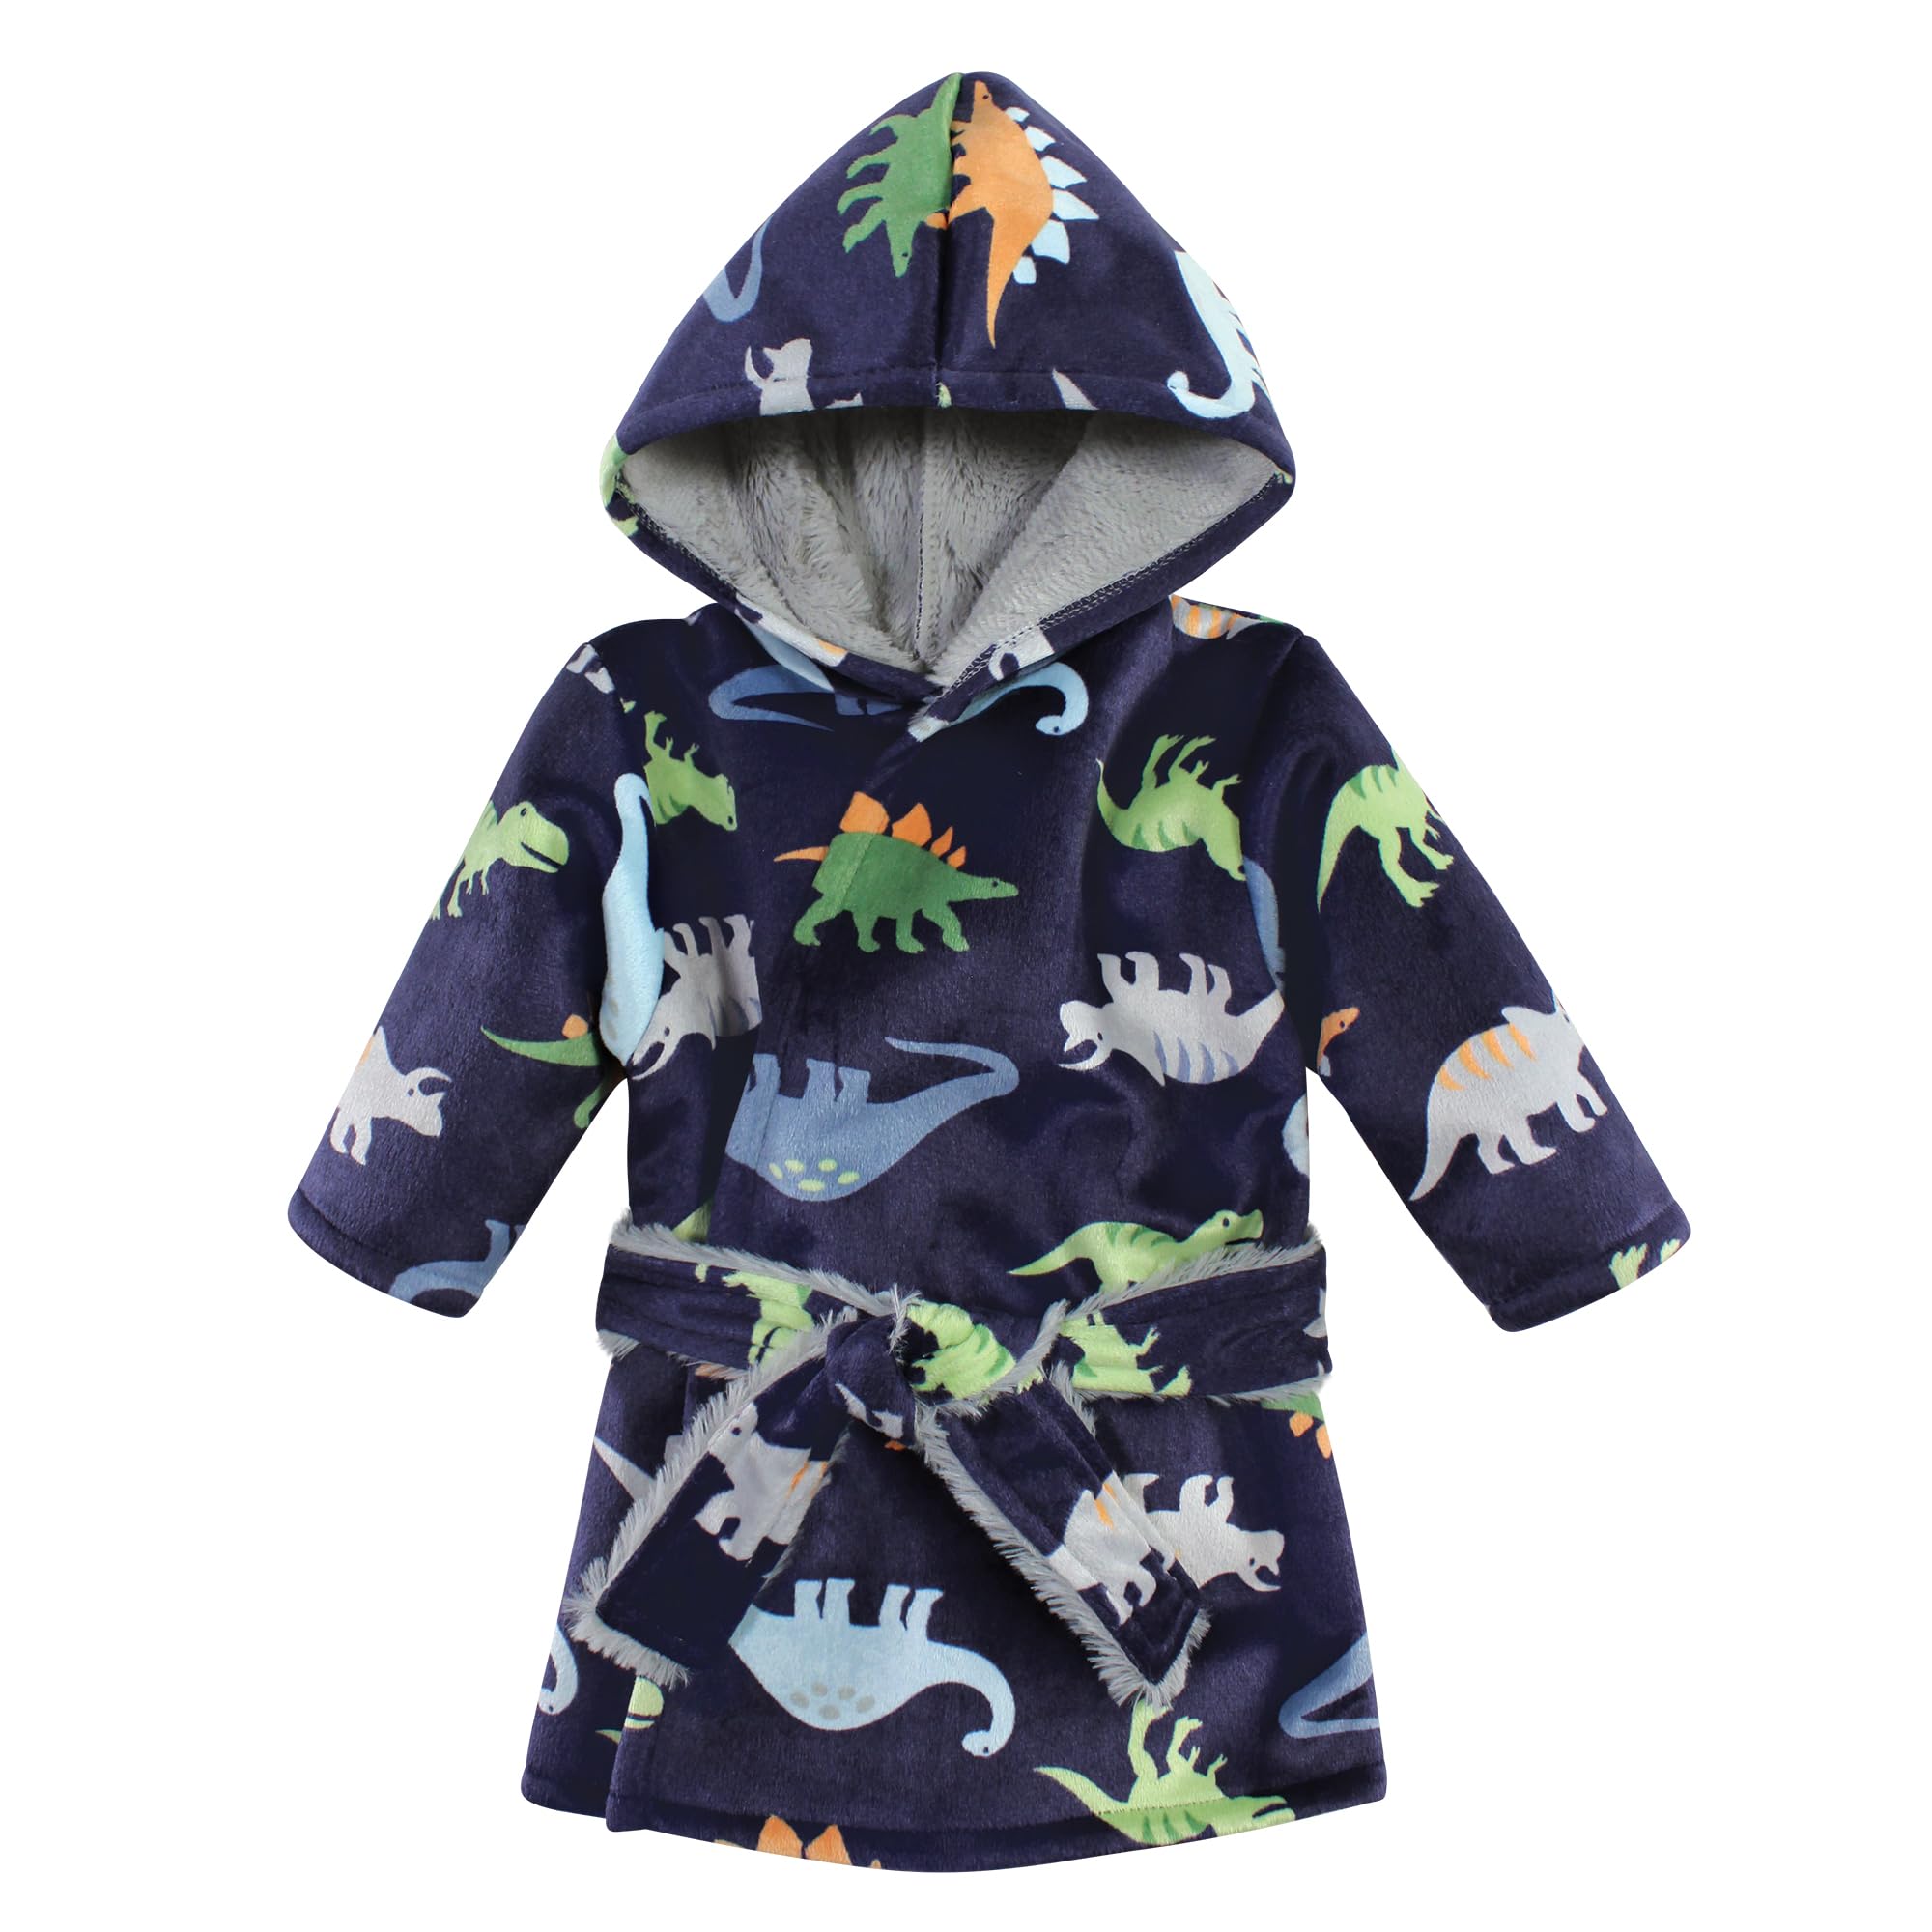 Hudson Baby Unisex Baby Mink with Faux Fur Lining Pool and Beach Robe Cover-ups, Dinosaurs, 18-24 Months